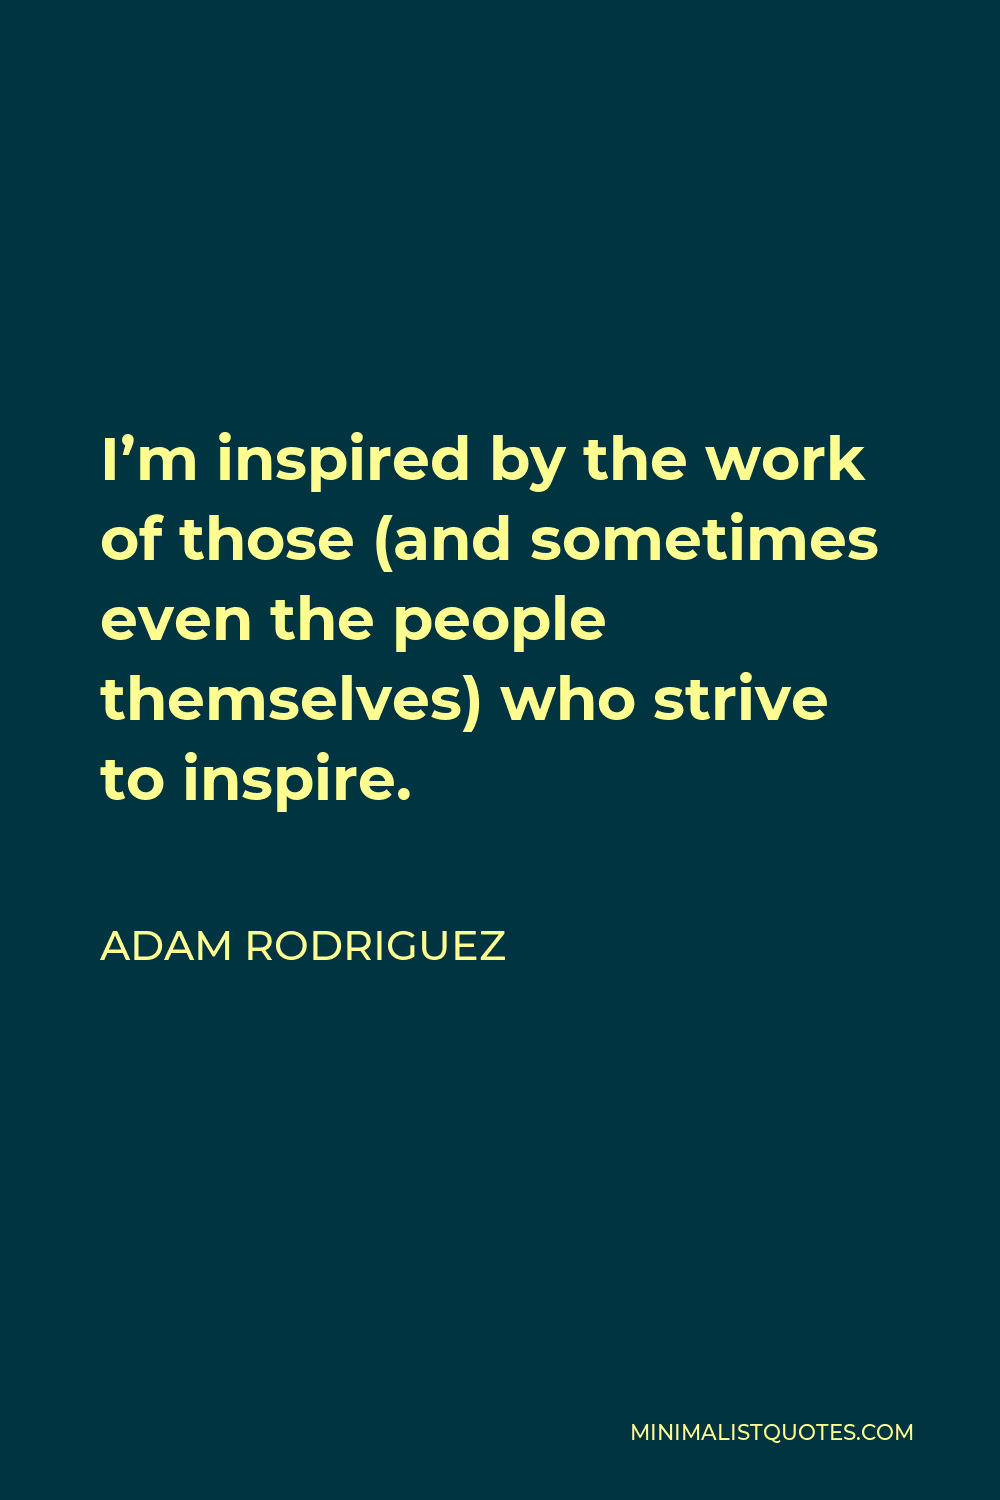 Adam Rodriguez Quote - I’m inspired by the work of those (and sometimes even the people themselves) who strive to inspire.